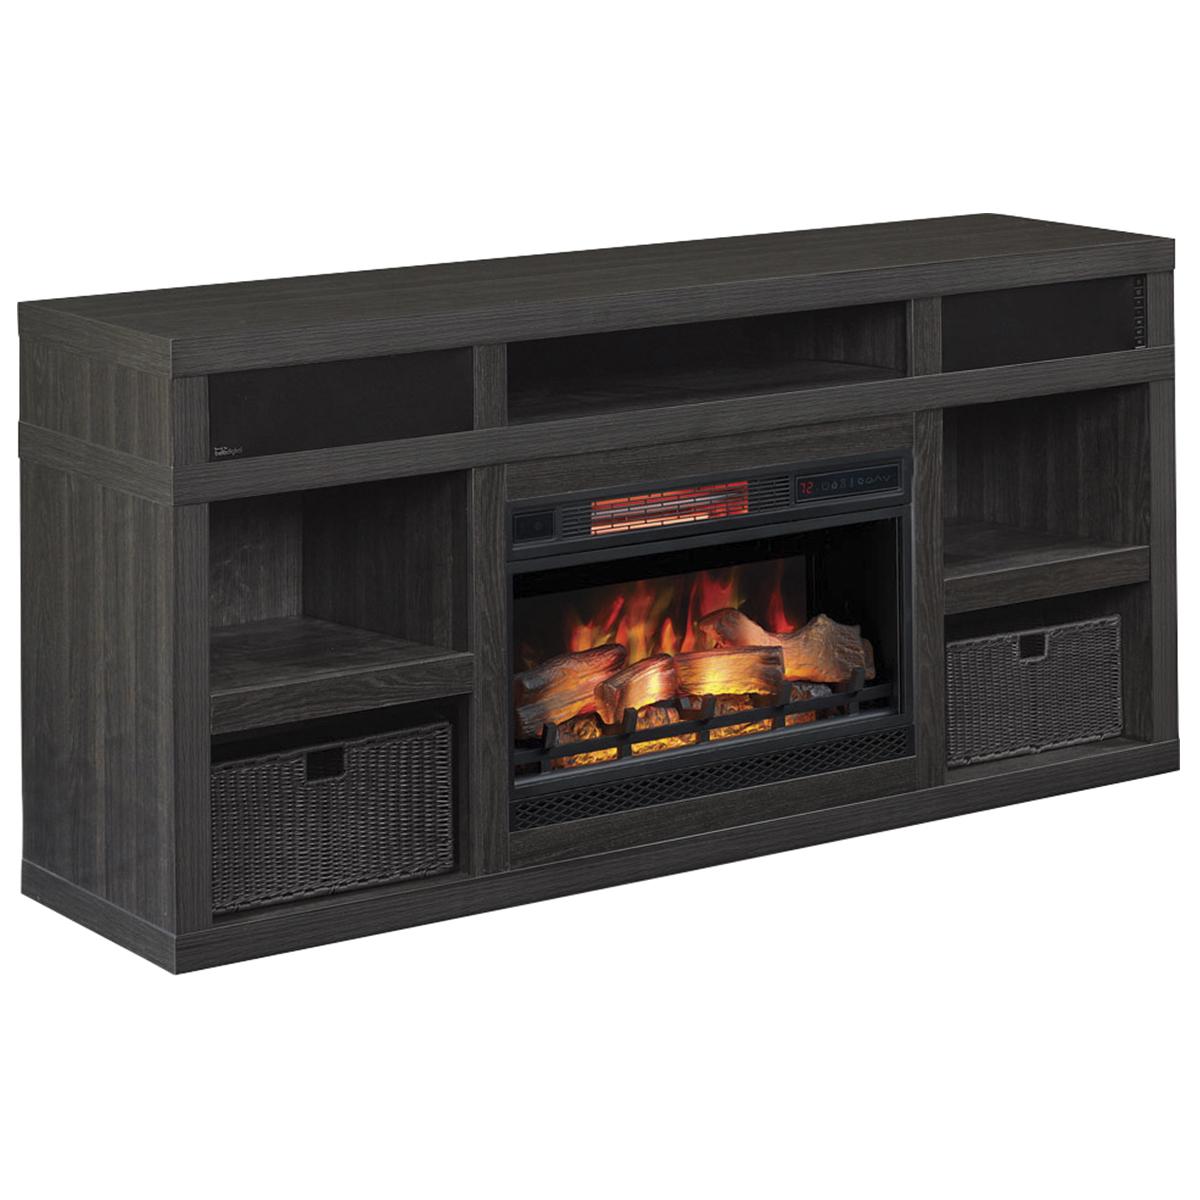 Small Fireplace Heater Lovely Fabio Flames Greatlin 3 Piece Fireplace Entertainment Wall